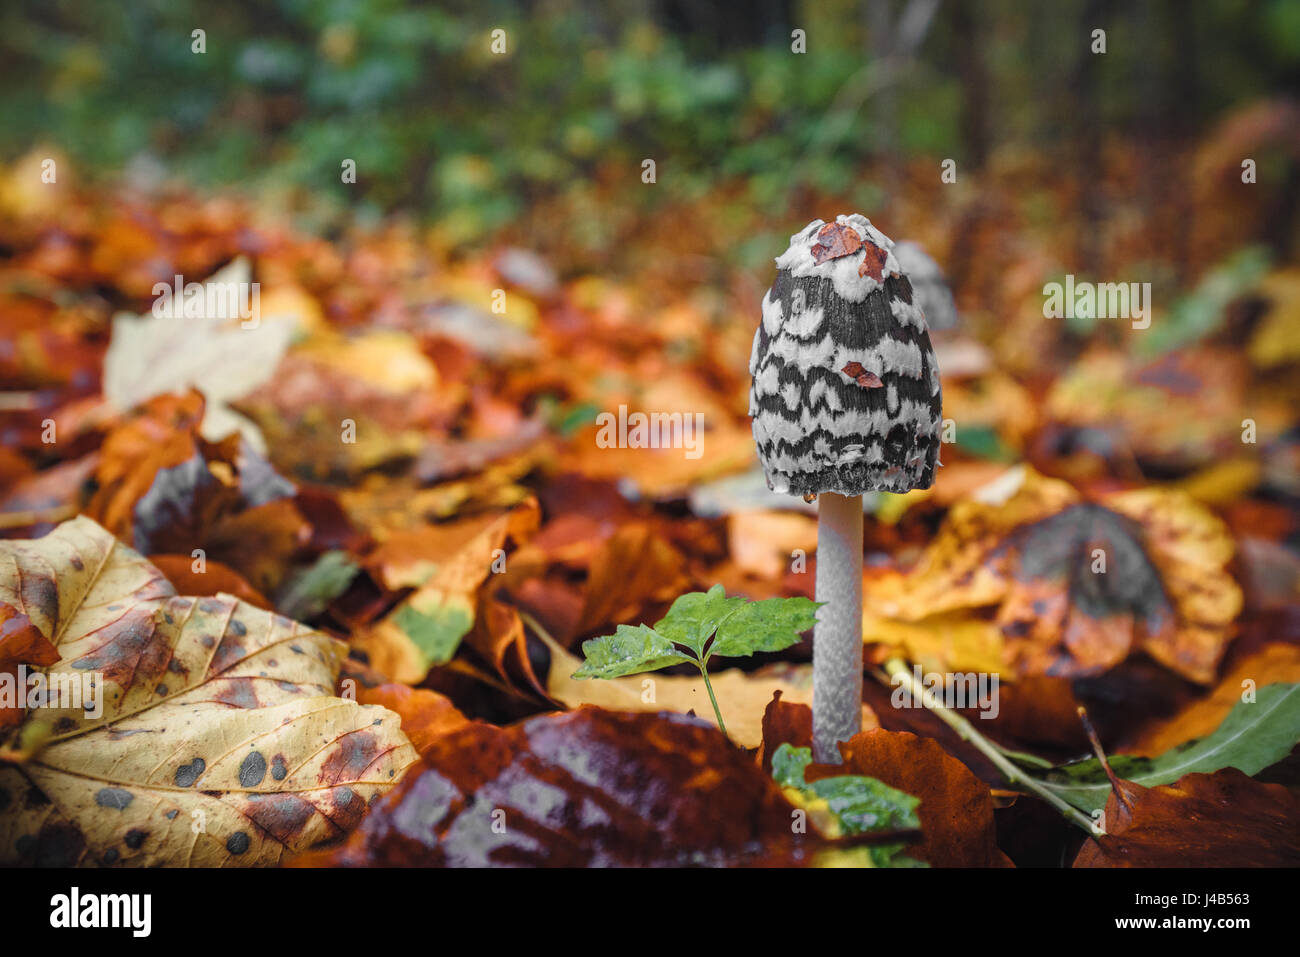 Black Coprinopsis picacea mushroom with white spots in a forest in the fall with autumn leaves in beautiful autumn colors in the autumn season Stock Photo